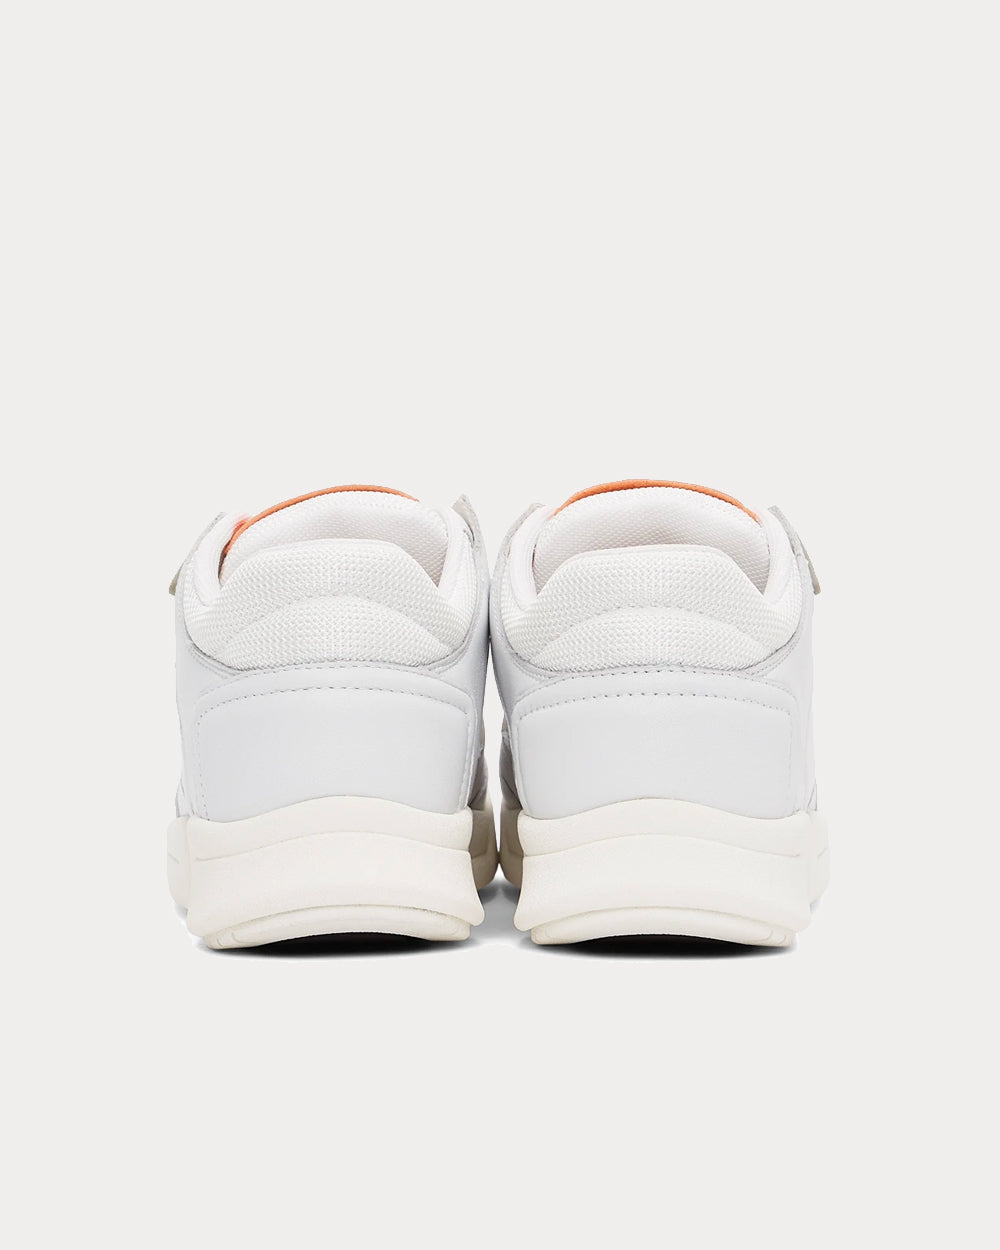 Heron Preston - Panelled Buffed Leather White / Cream Low Top Sneakers